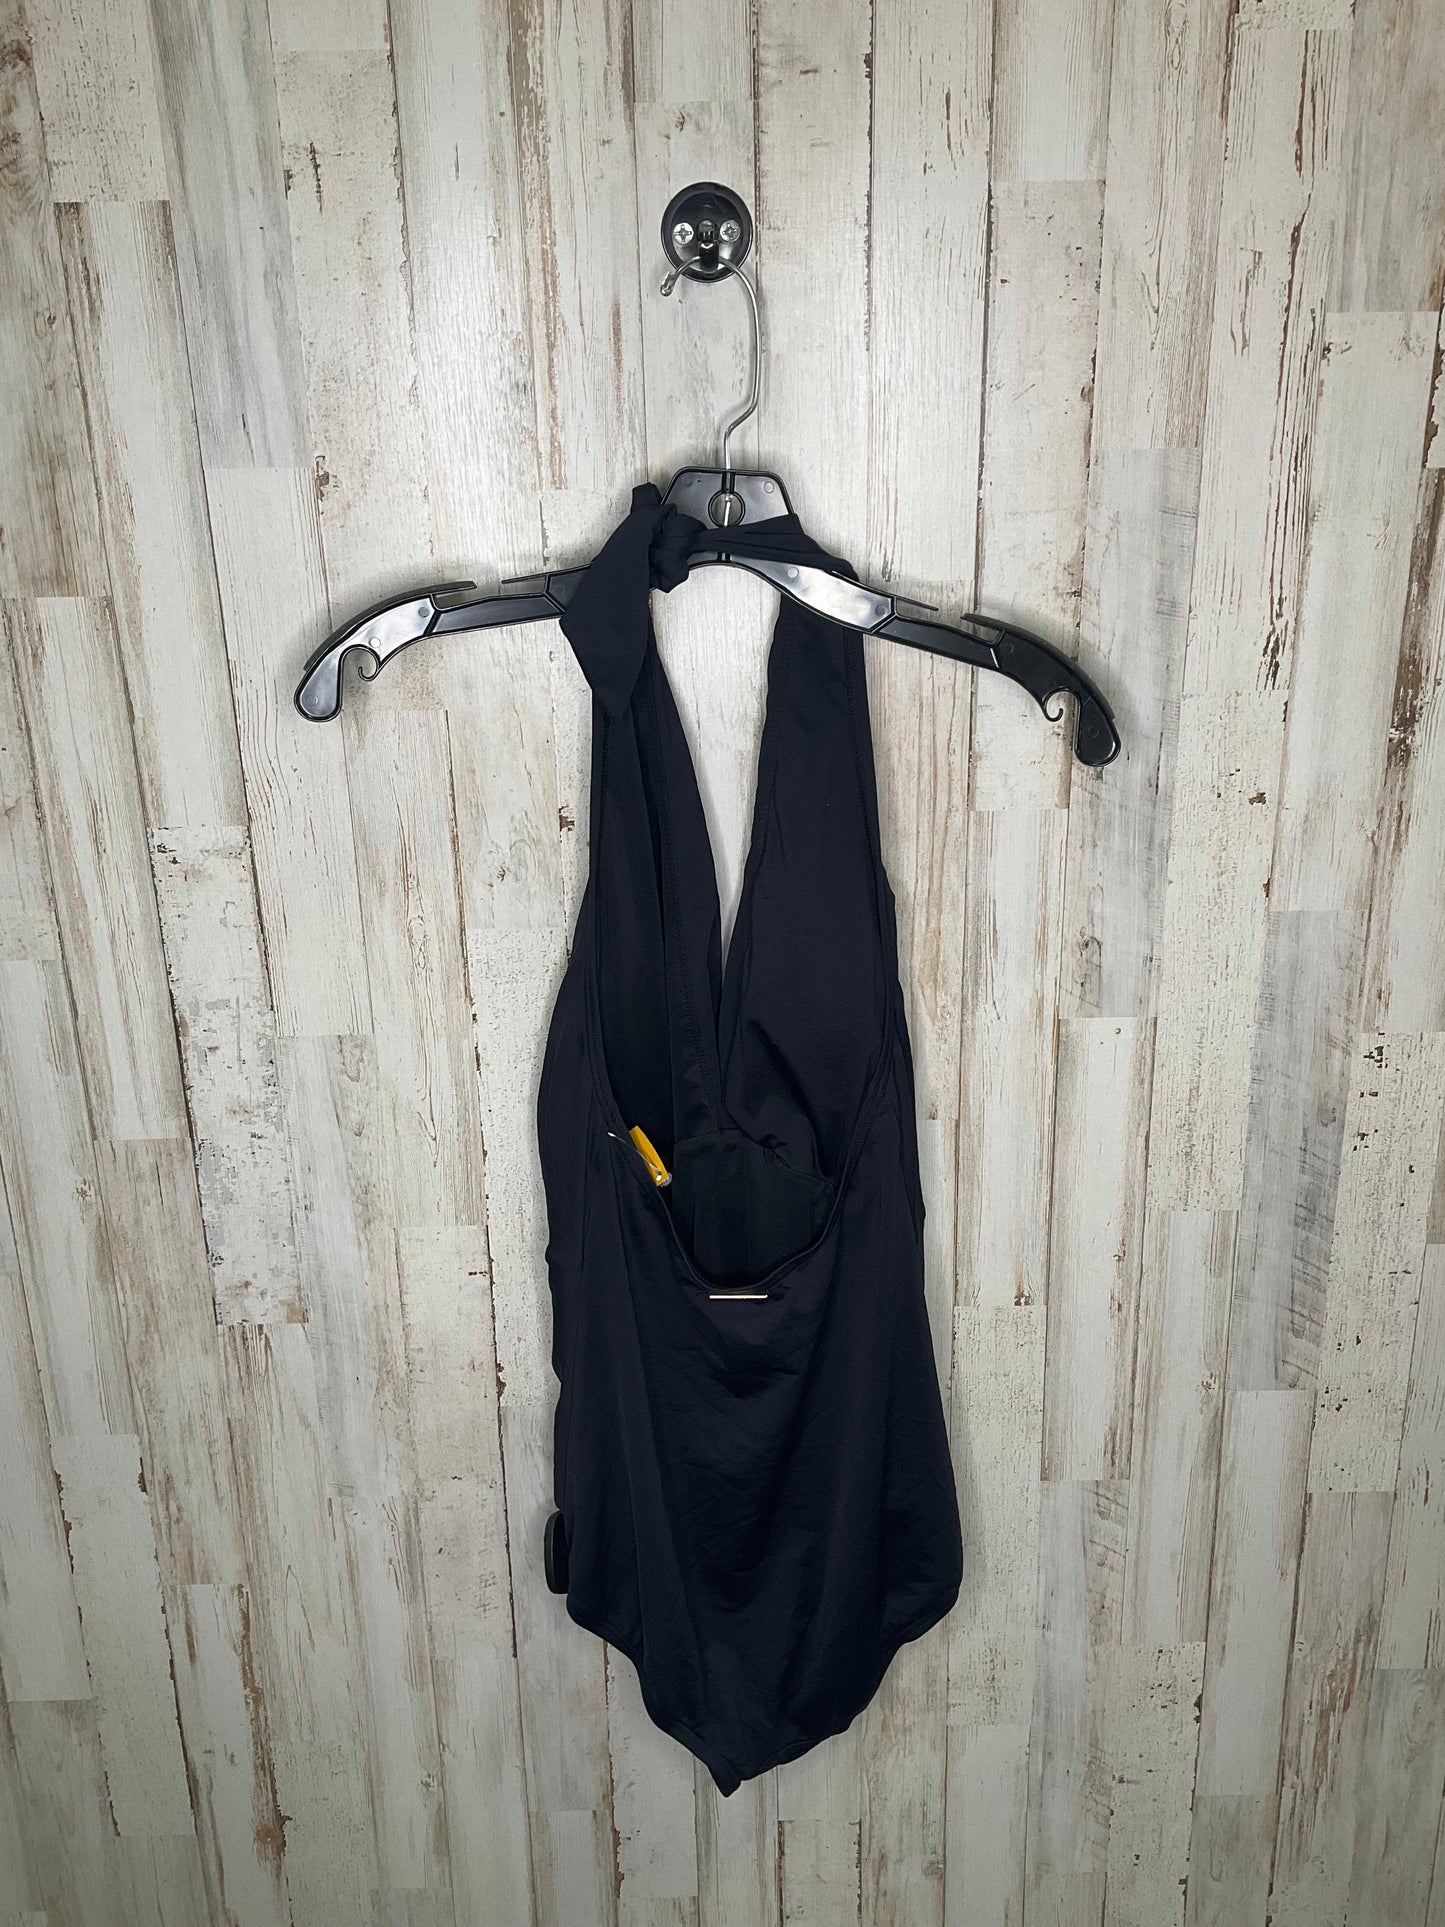 Swimsuit By Michael Kors  Size: 10